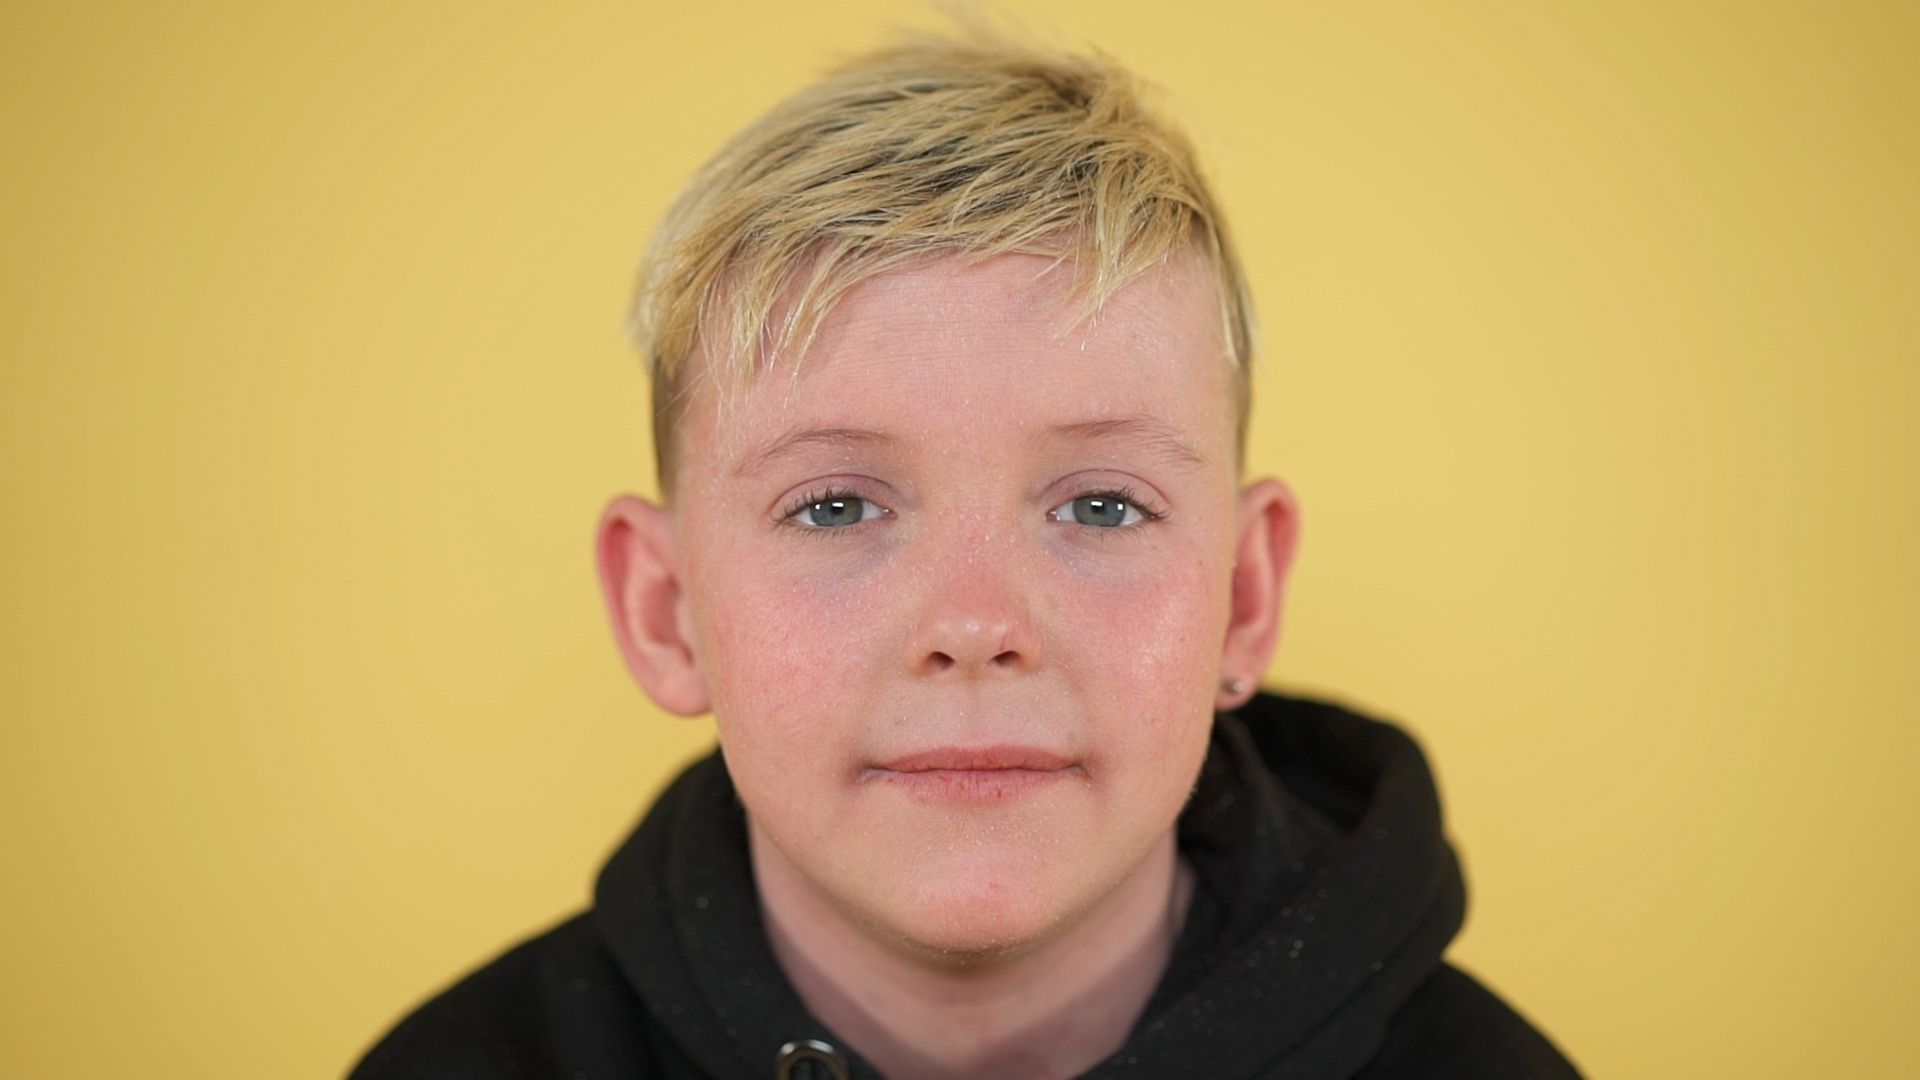 A close up image of David, a 13-year-old white boy who short blond hair and a condition which causes his skin to blister and tear. He's wearing a black hoodie and looking directly at the camera.